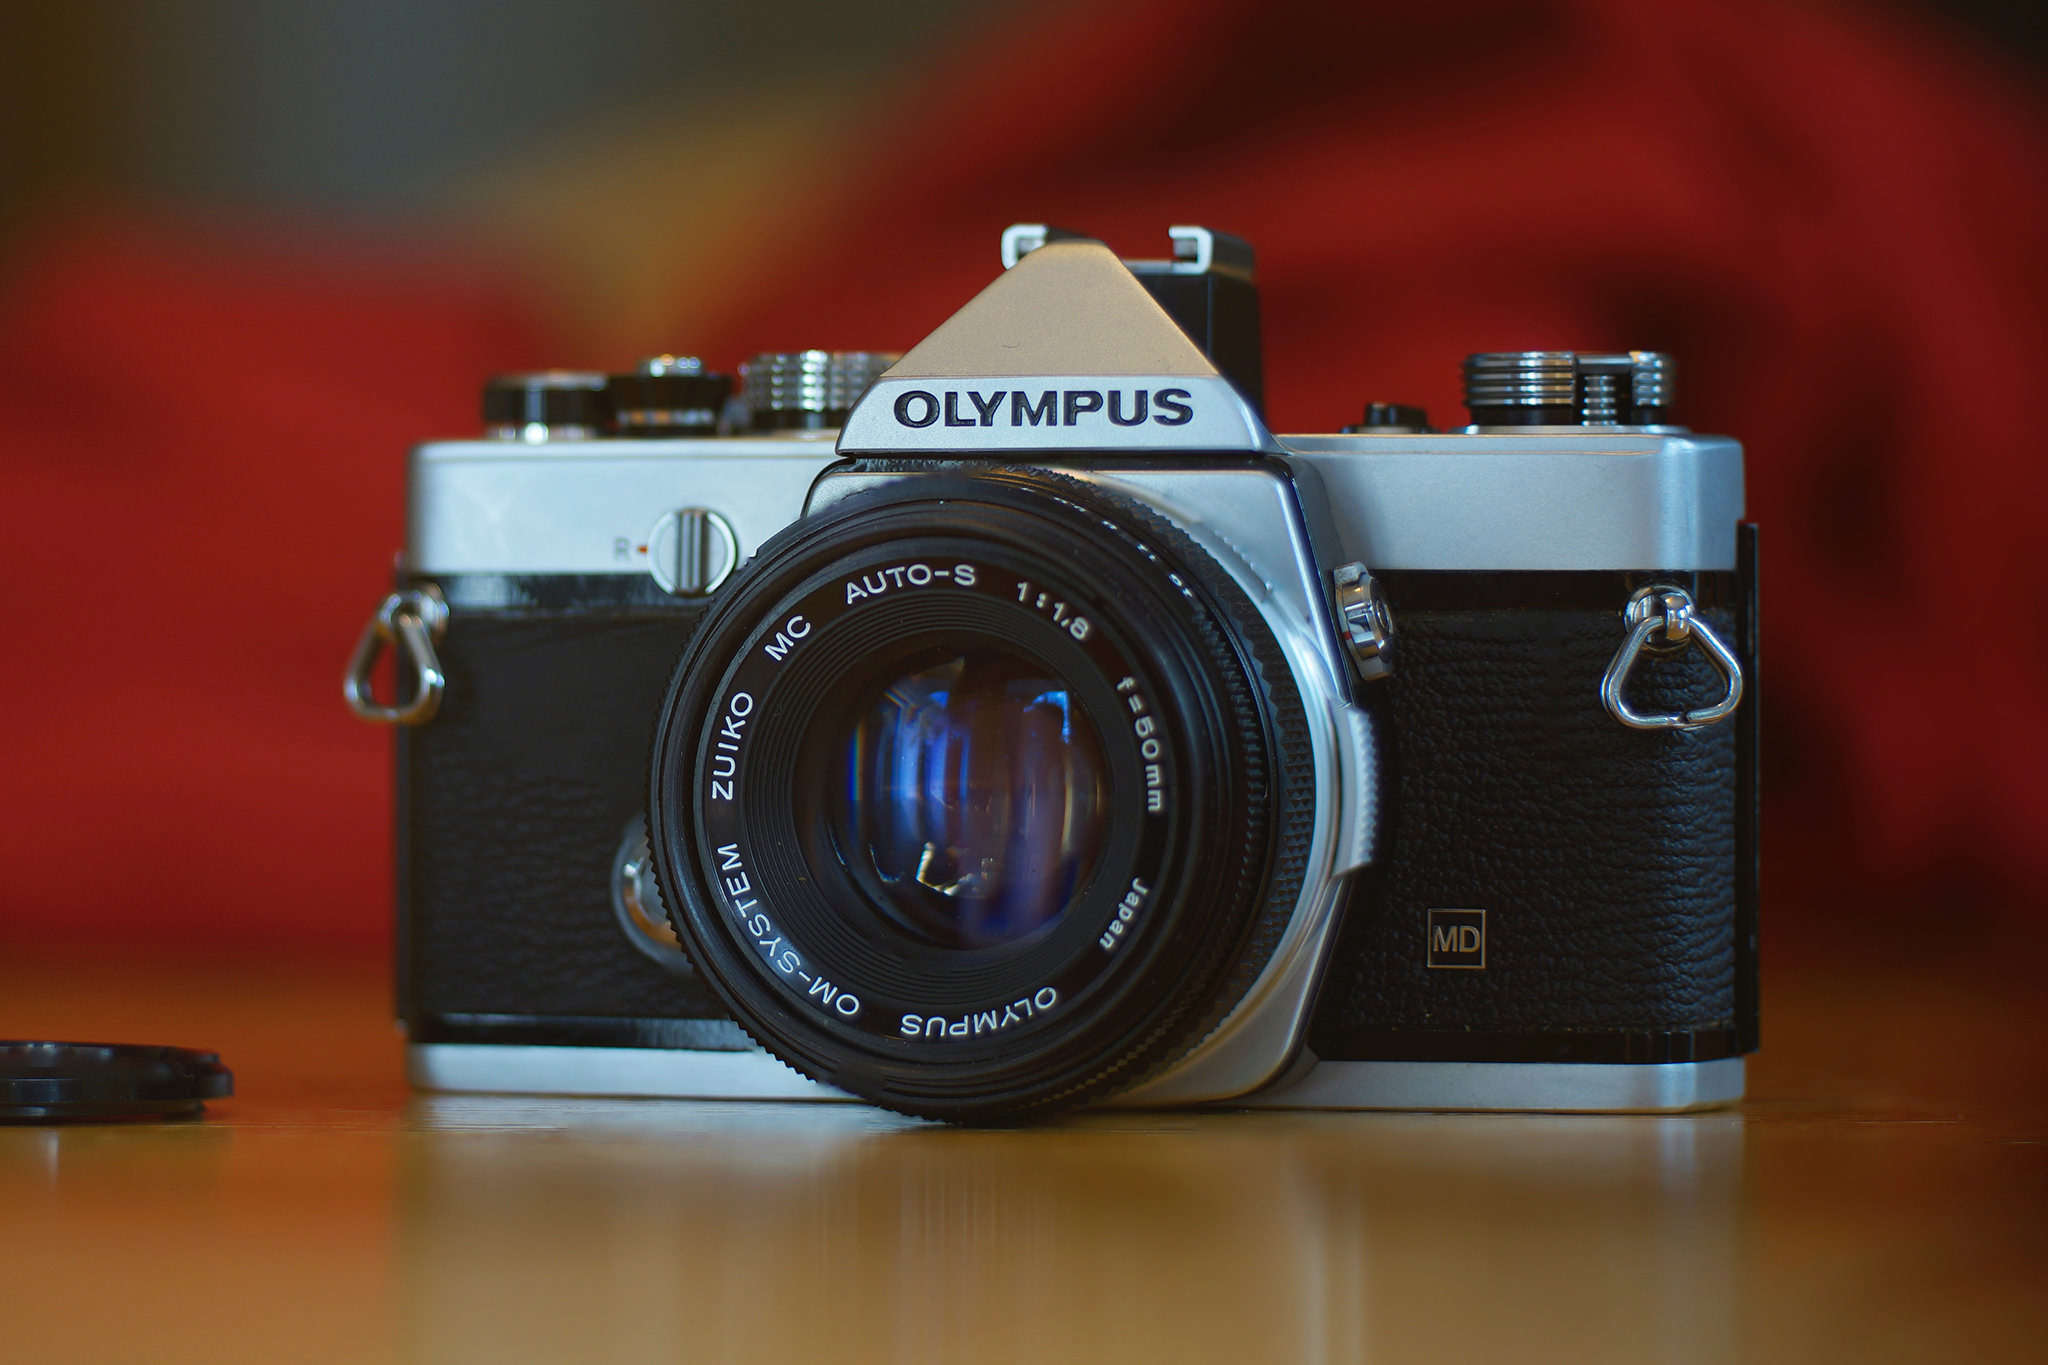 Olympus OM-1 MD - Learn more about the 35mm SLR camera